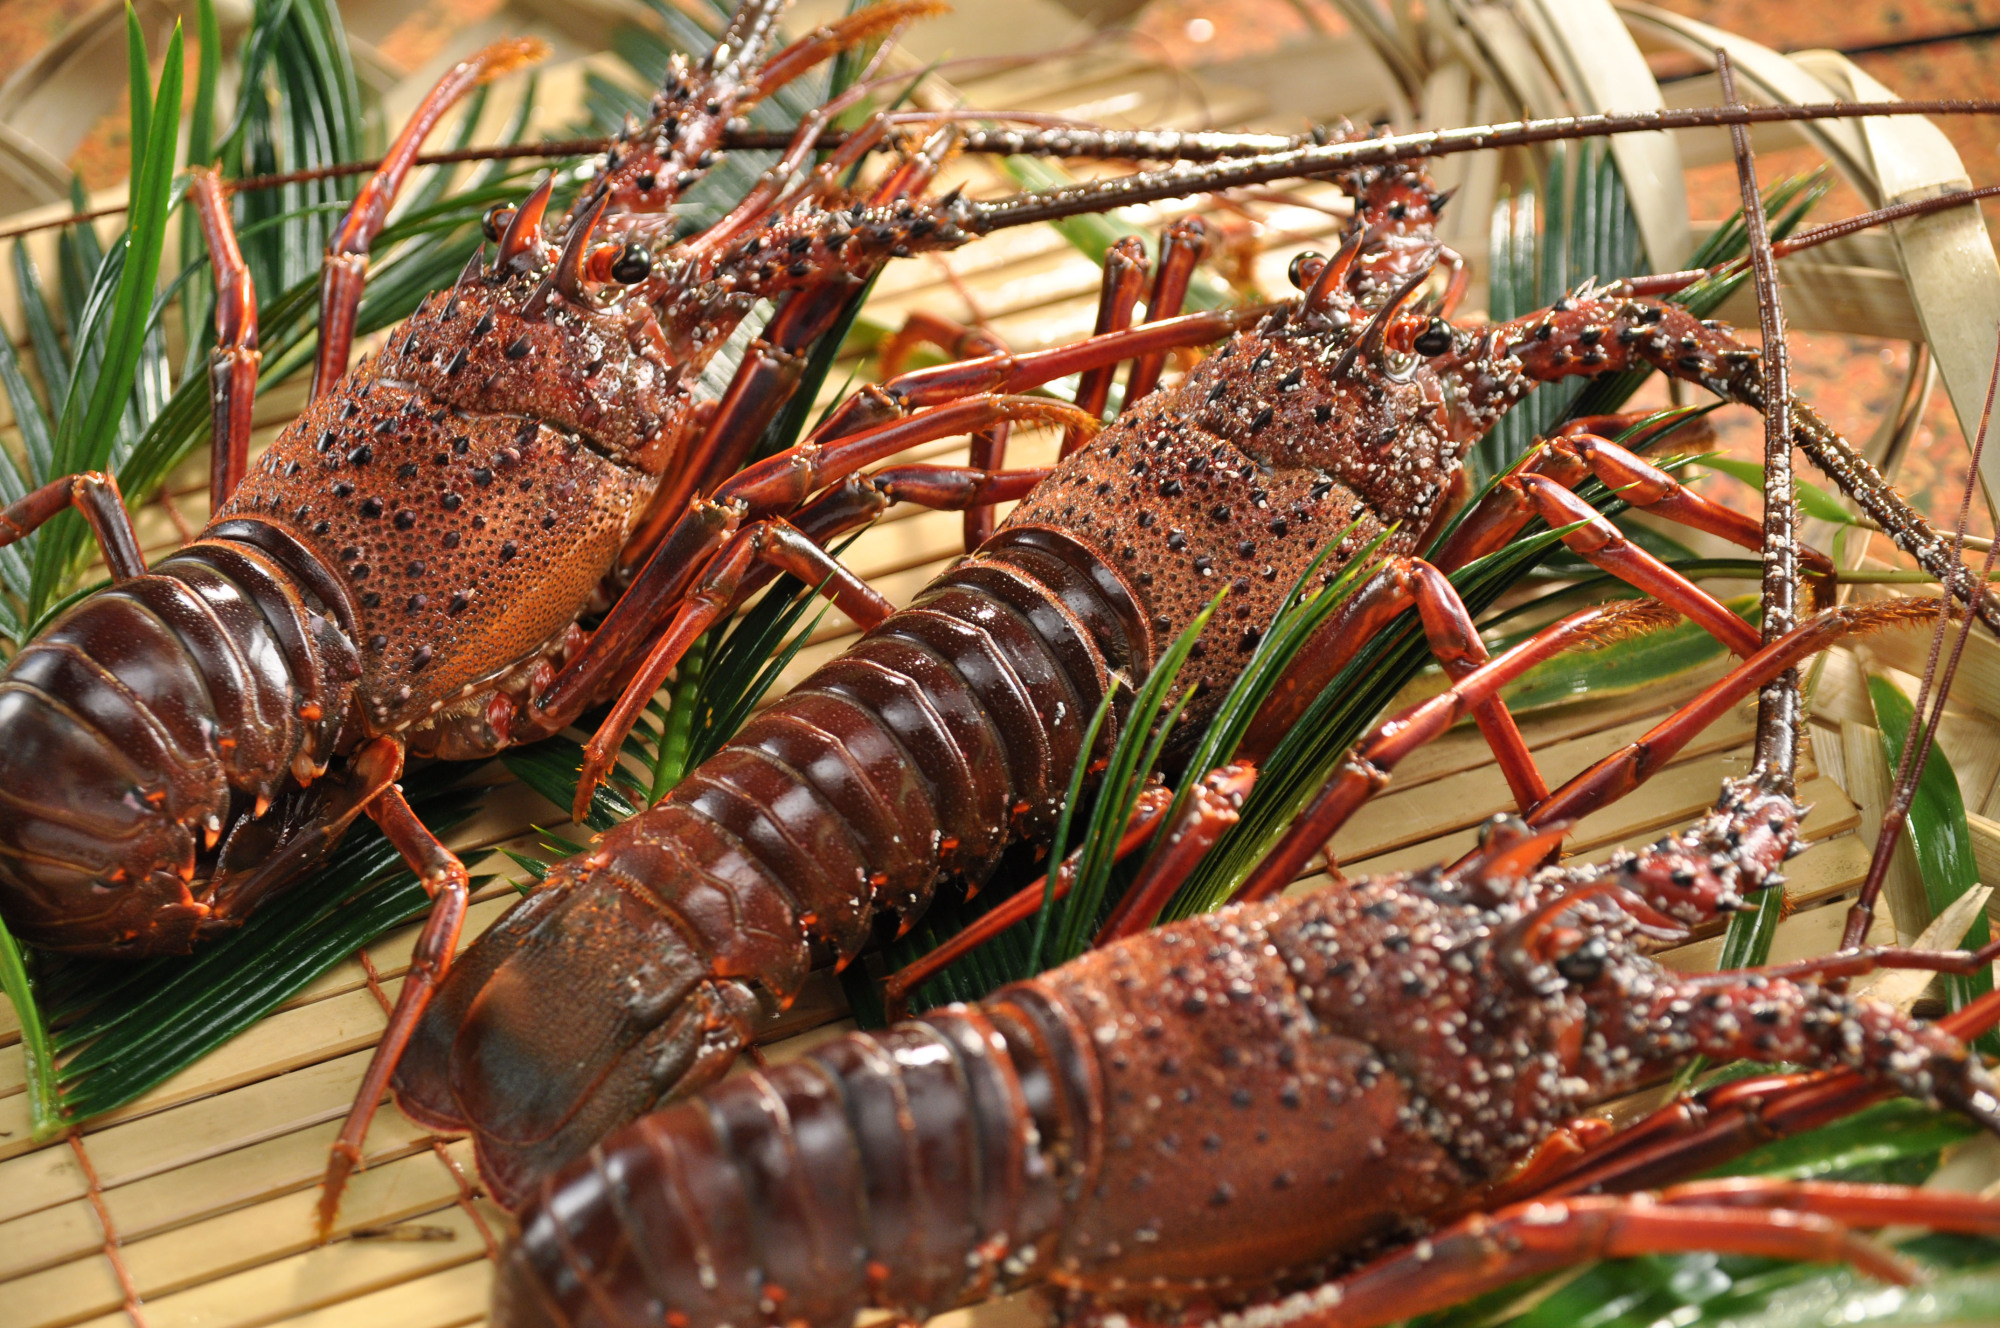 Highly prized Ise-ebi (Japanese spiny lobster) is caught in Ise Bay in Mie Prefecture.